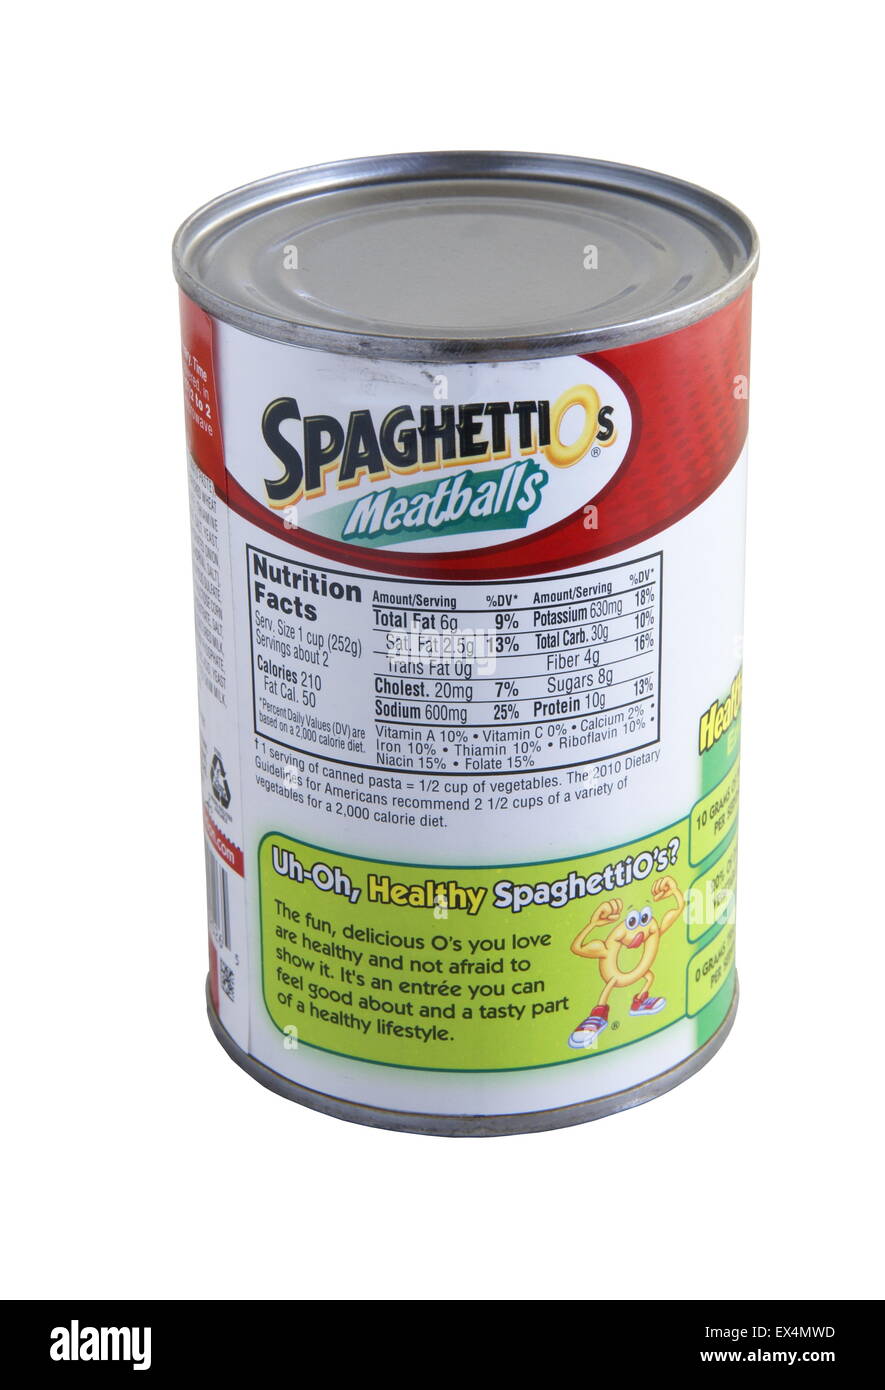 The Nutrition Label For Campbell S Spaghettios With Meatballs From The Campbell Soup Company Camden Nj Usa Isolated On White Stock Photo Alamy